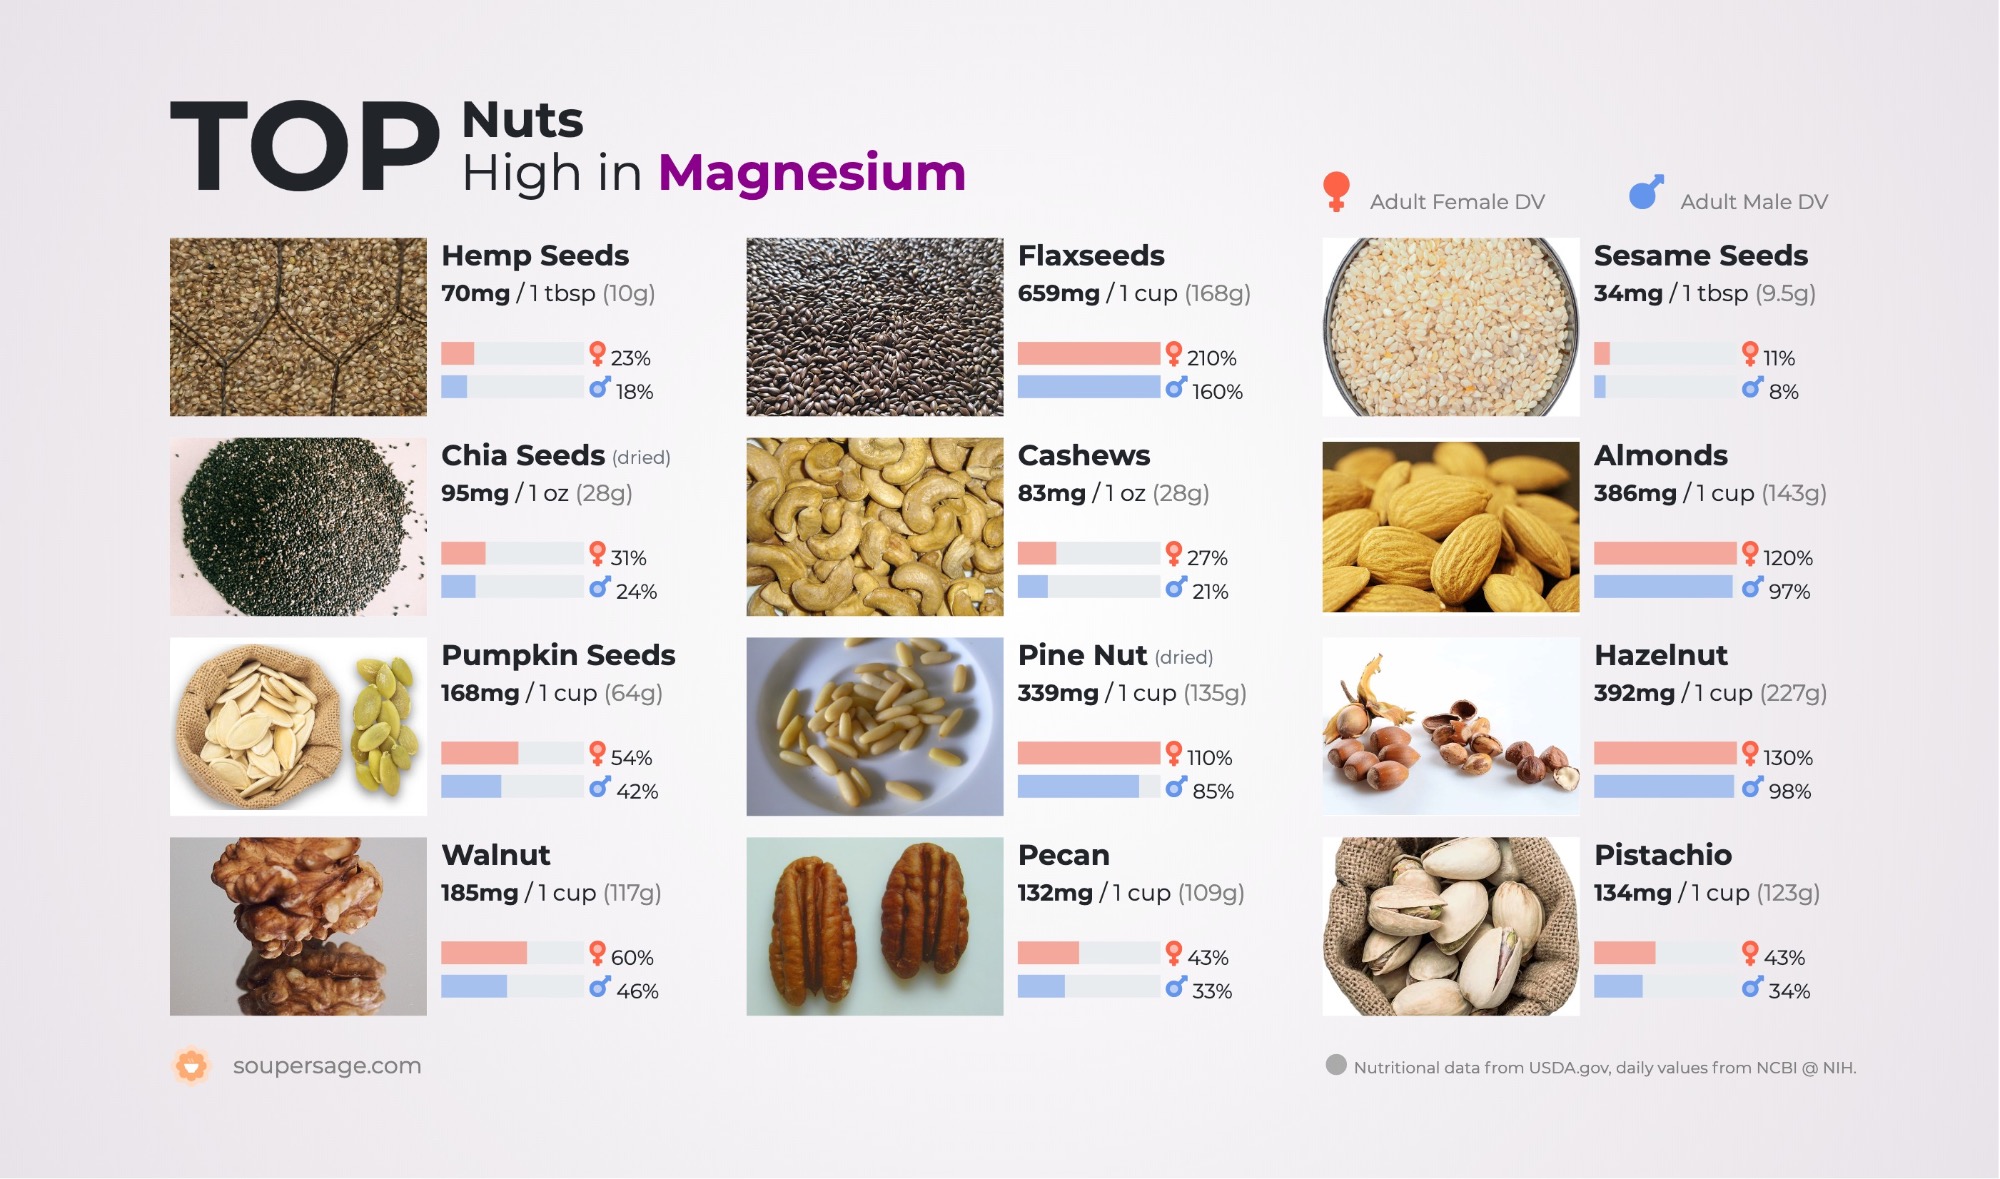 image of Top Nuts High in Magnesium